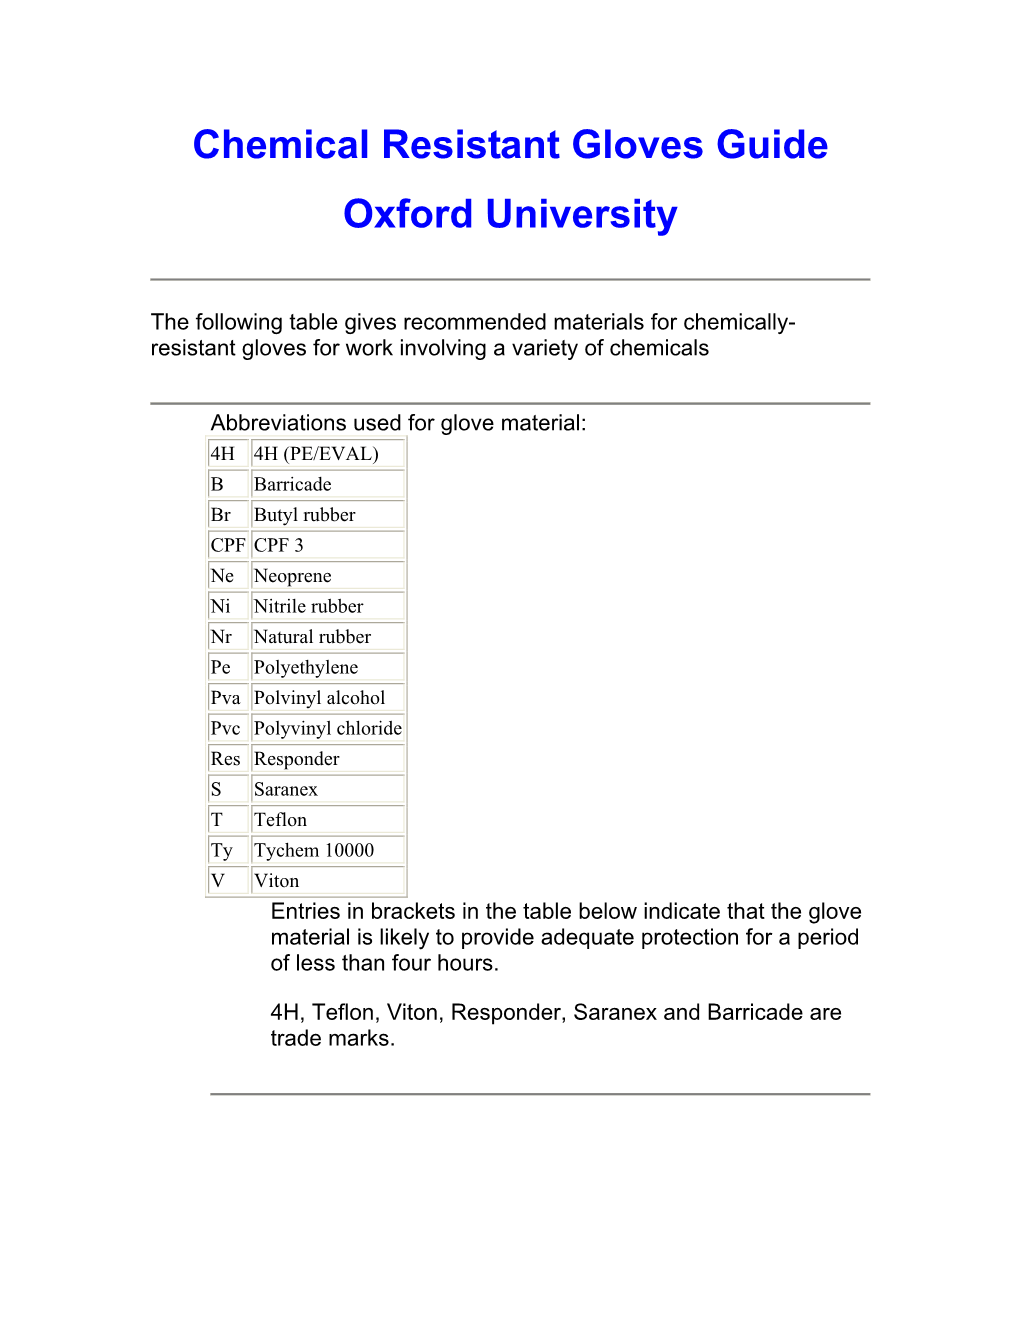 Chemical Resistant Gloves Guide Oxford University